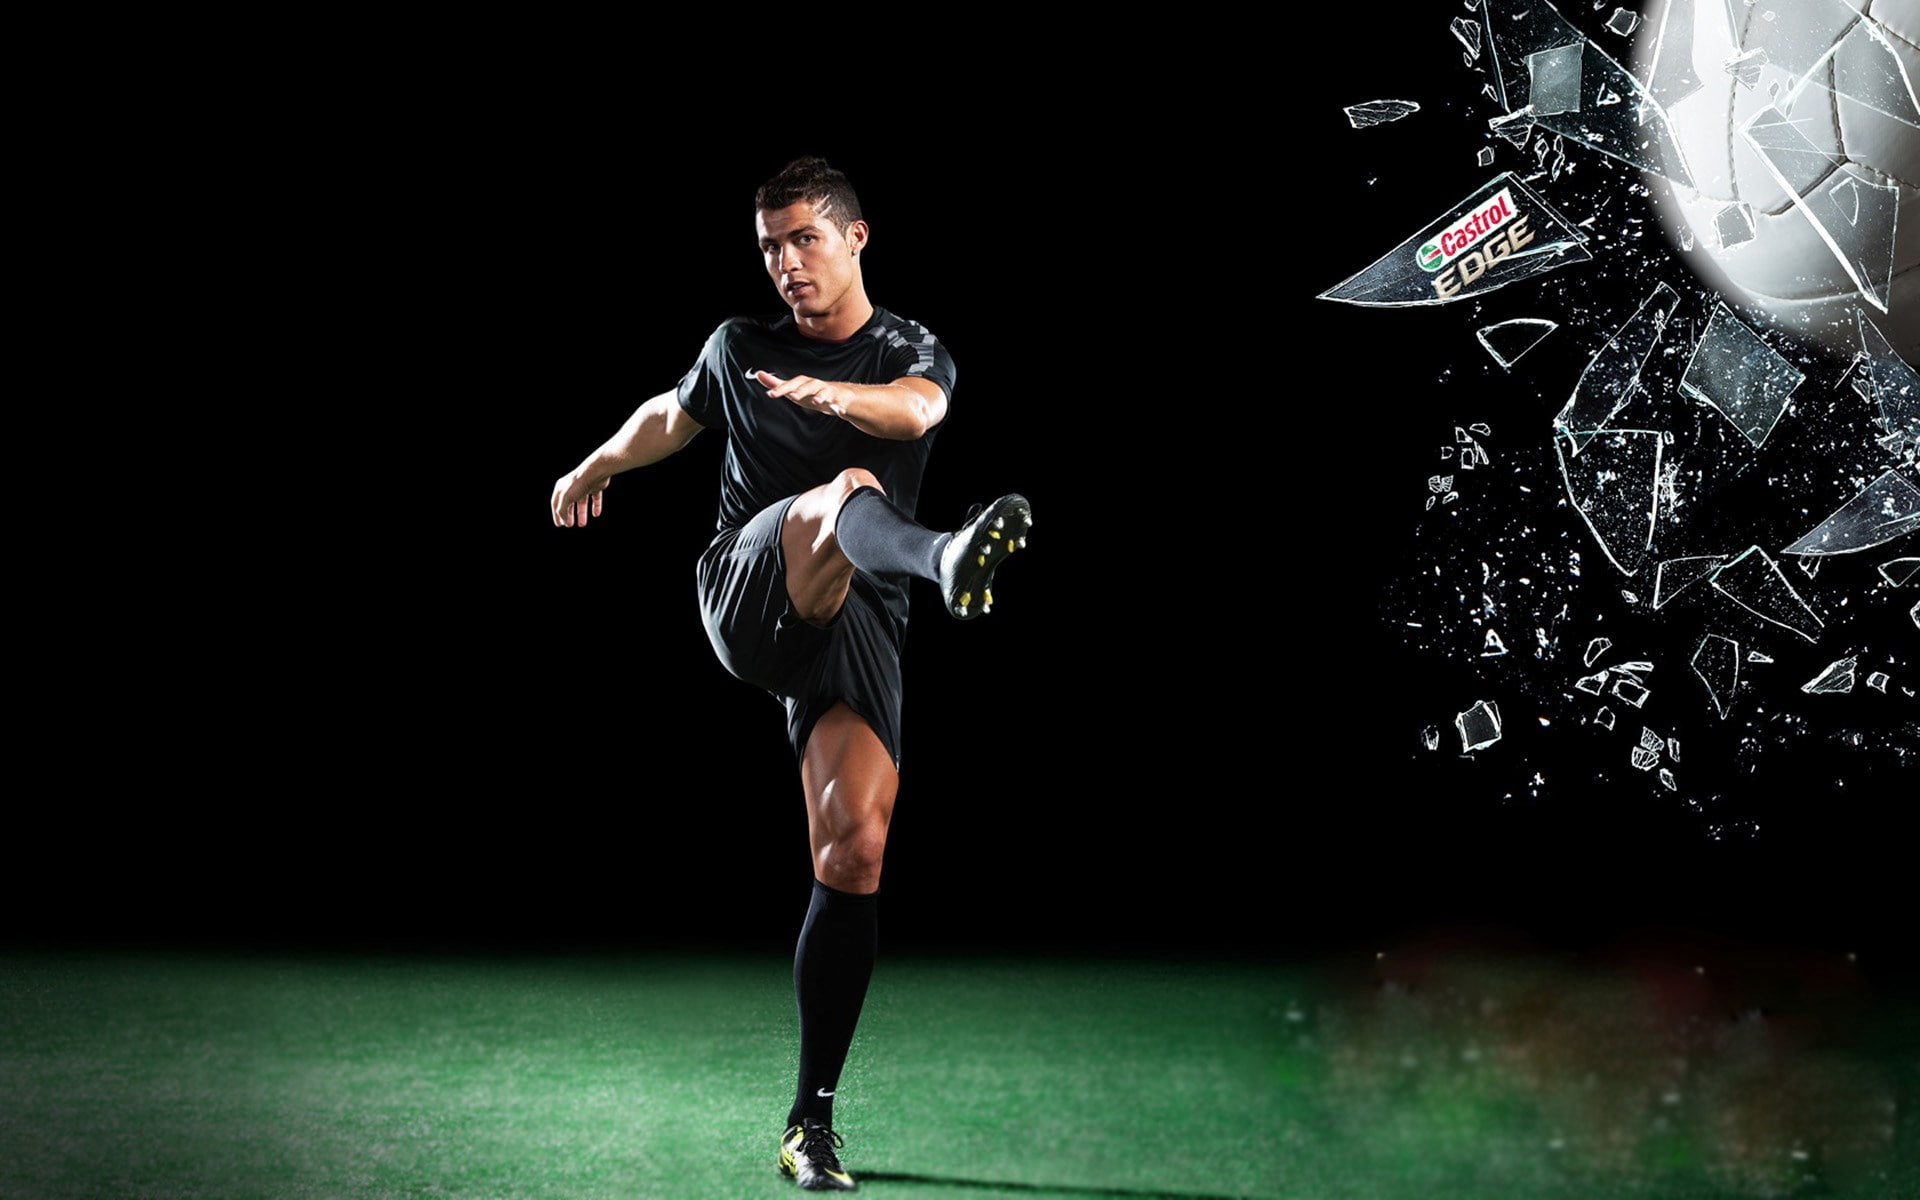 cr7  android, sport, one person, athlete, full length, motion